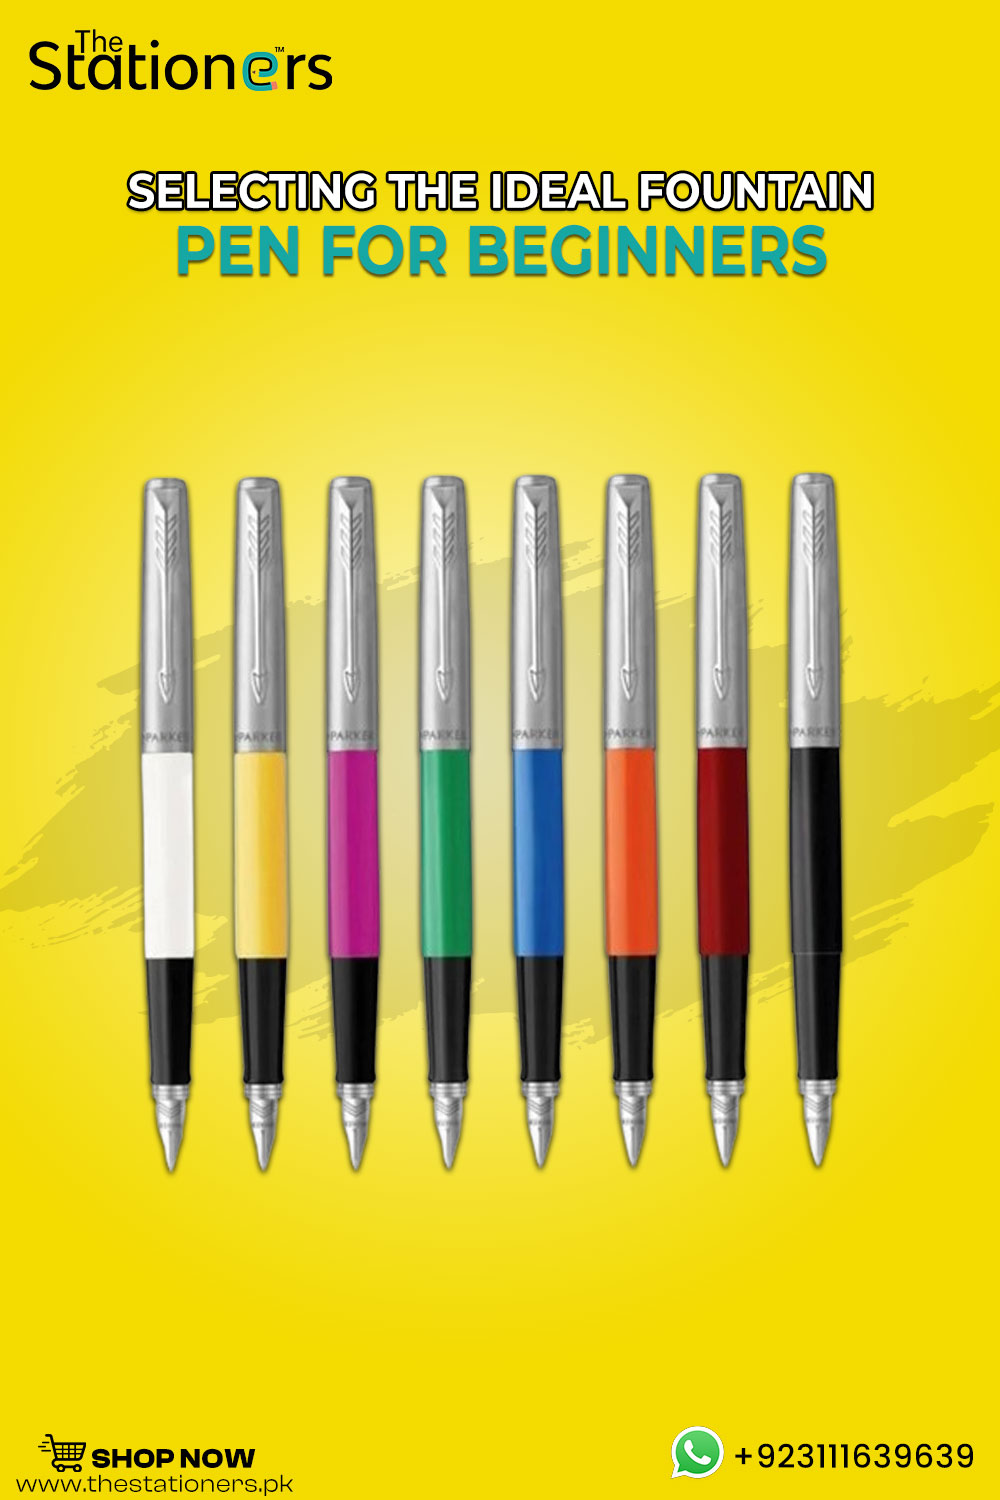 Selecting the Ideal Fountain Pen for Beginners